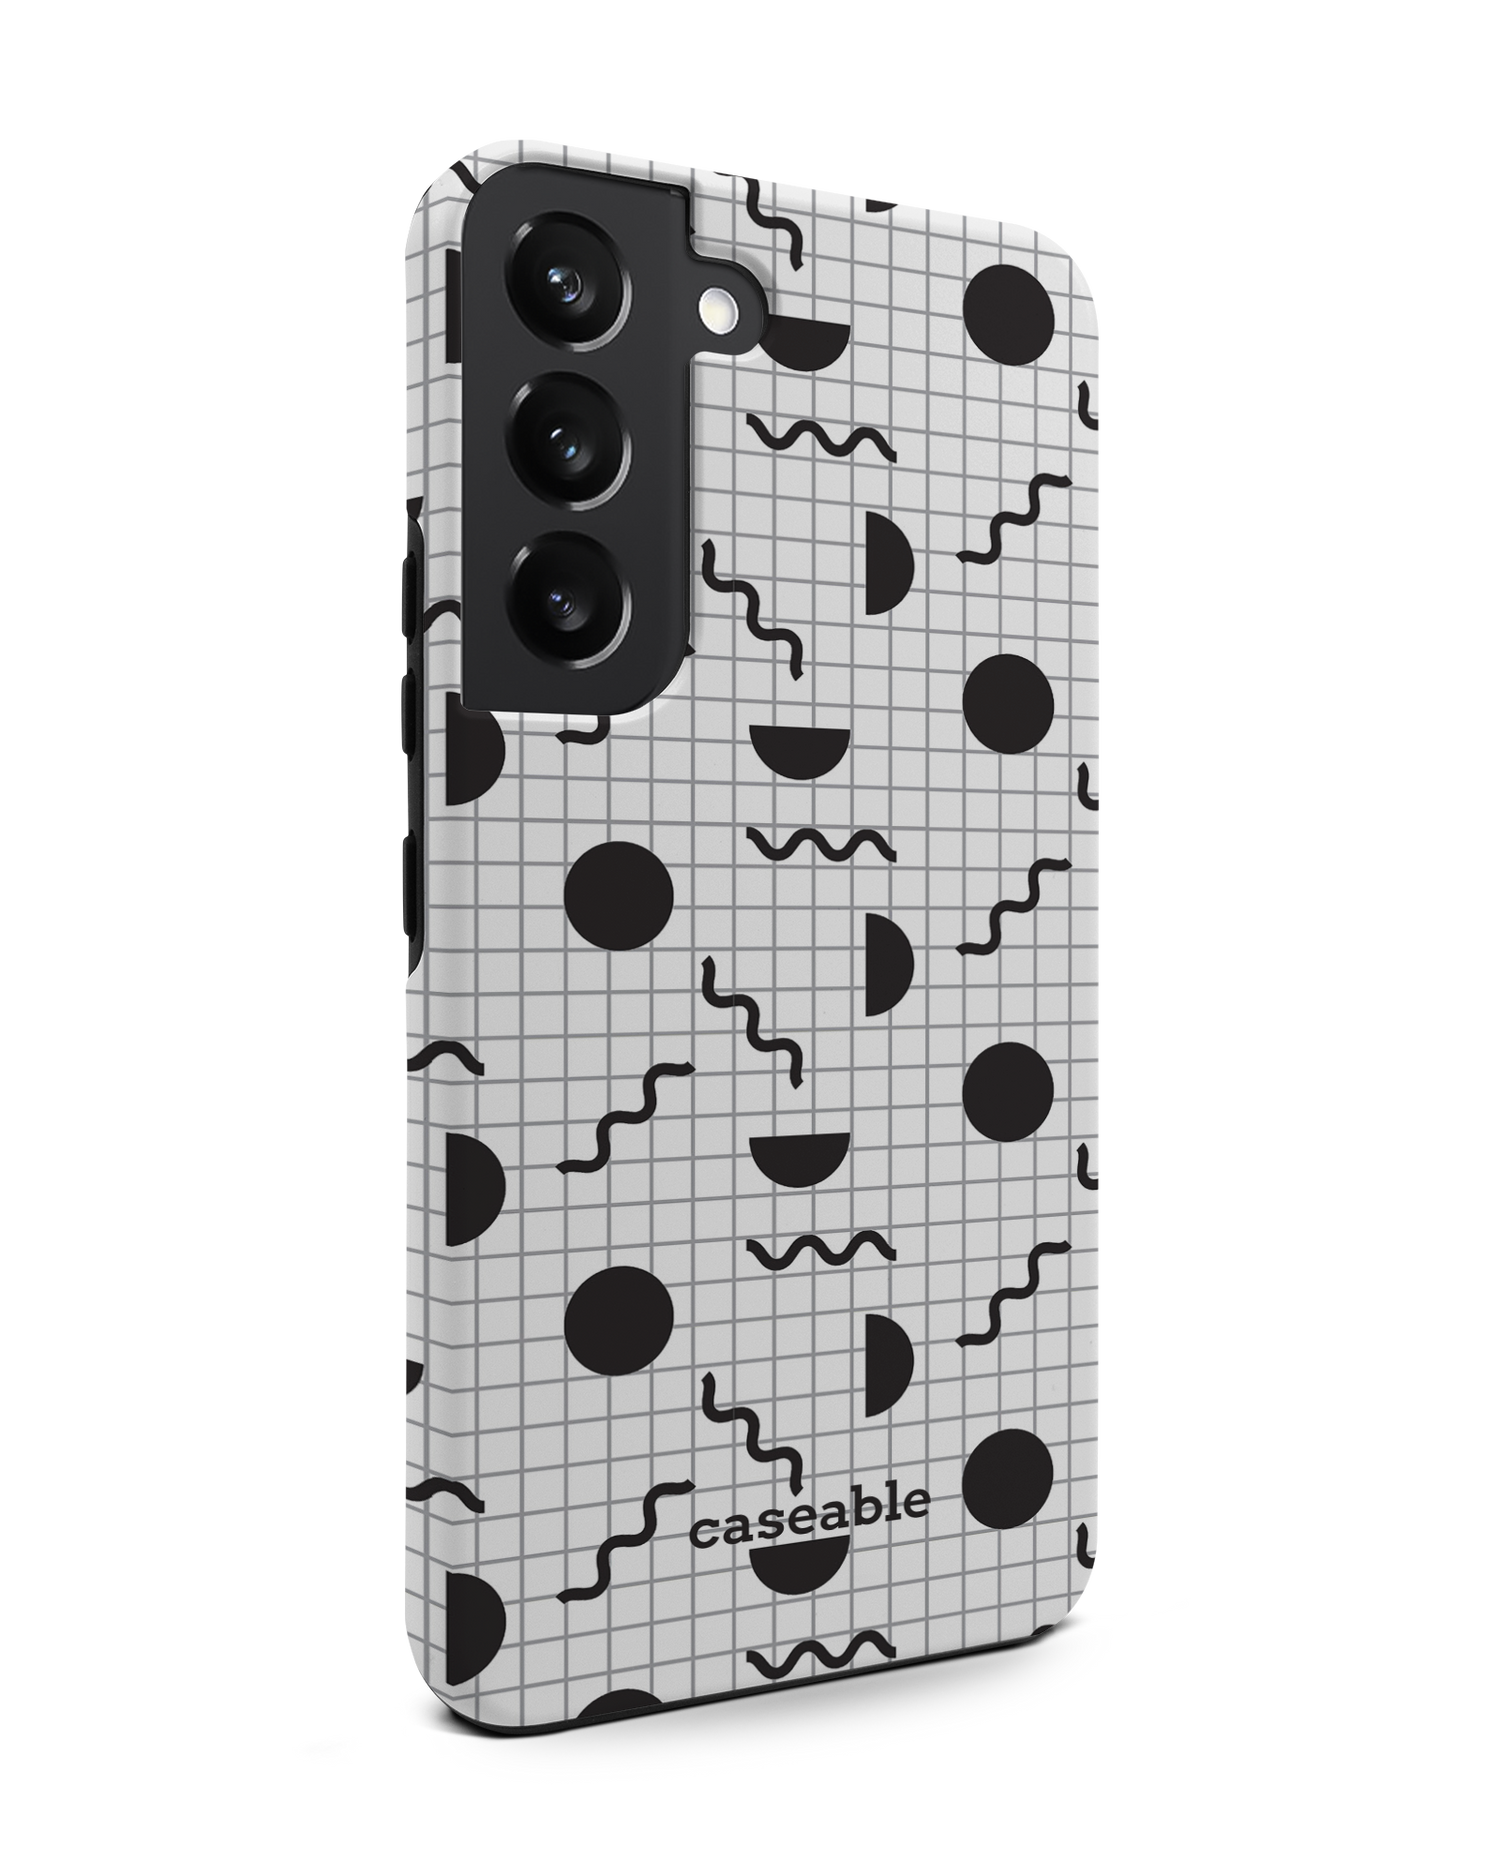 Metric Matter Premium Phone Case Samsung Galaxy S22 5G: View from the left side